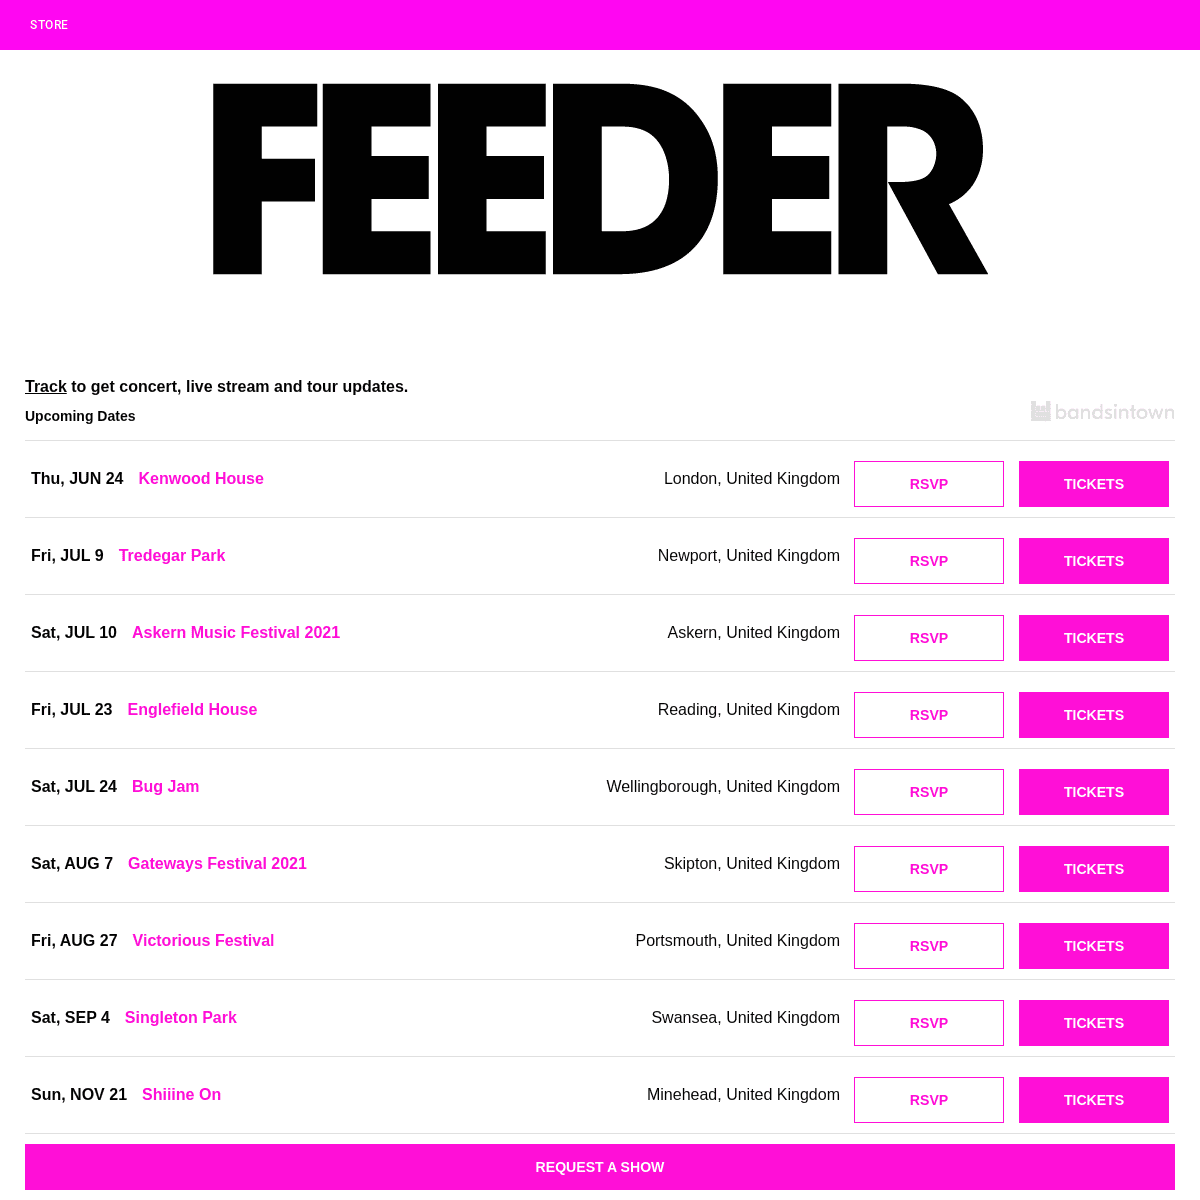 A complete backup of https://feederweb.com